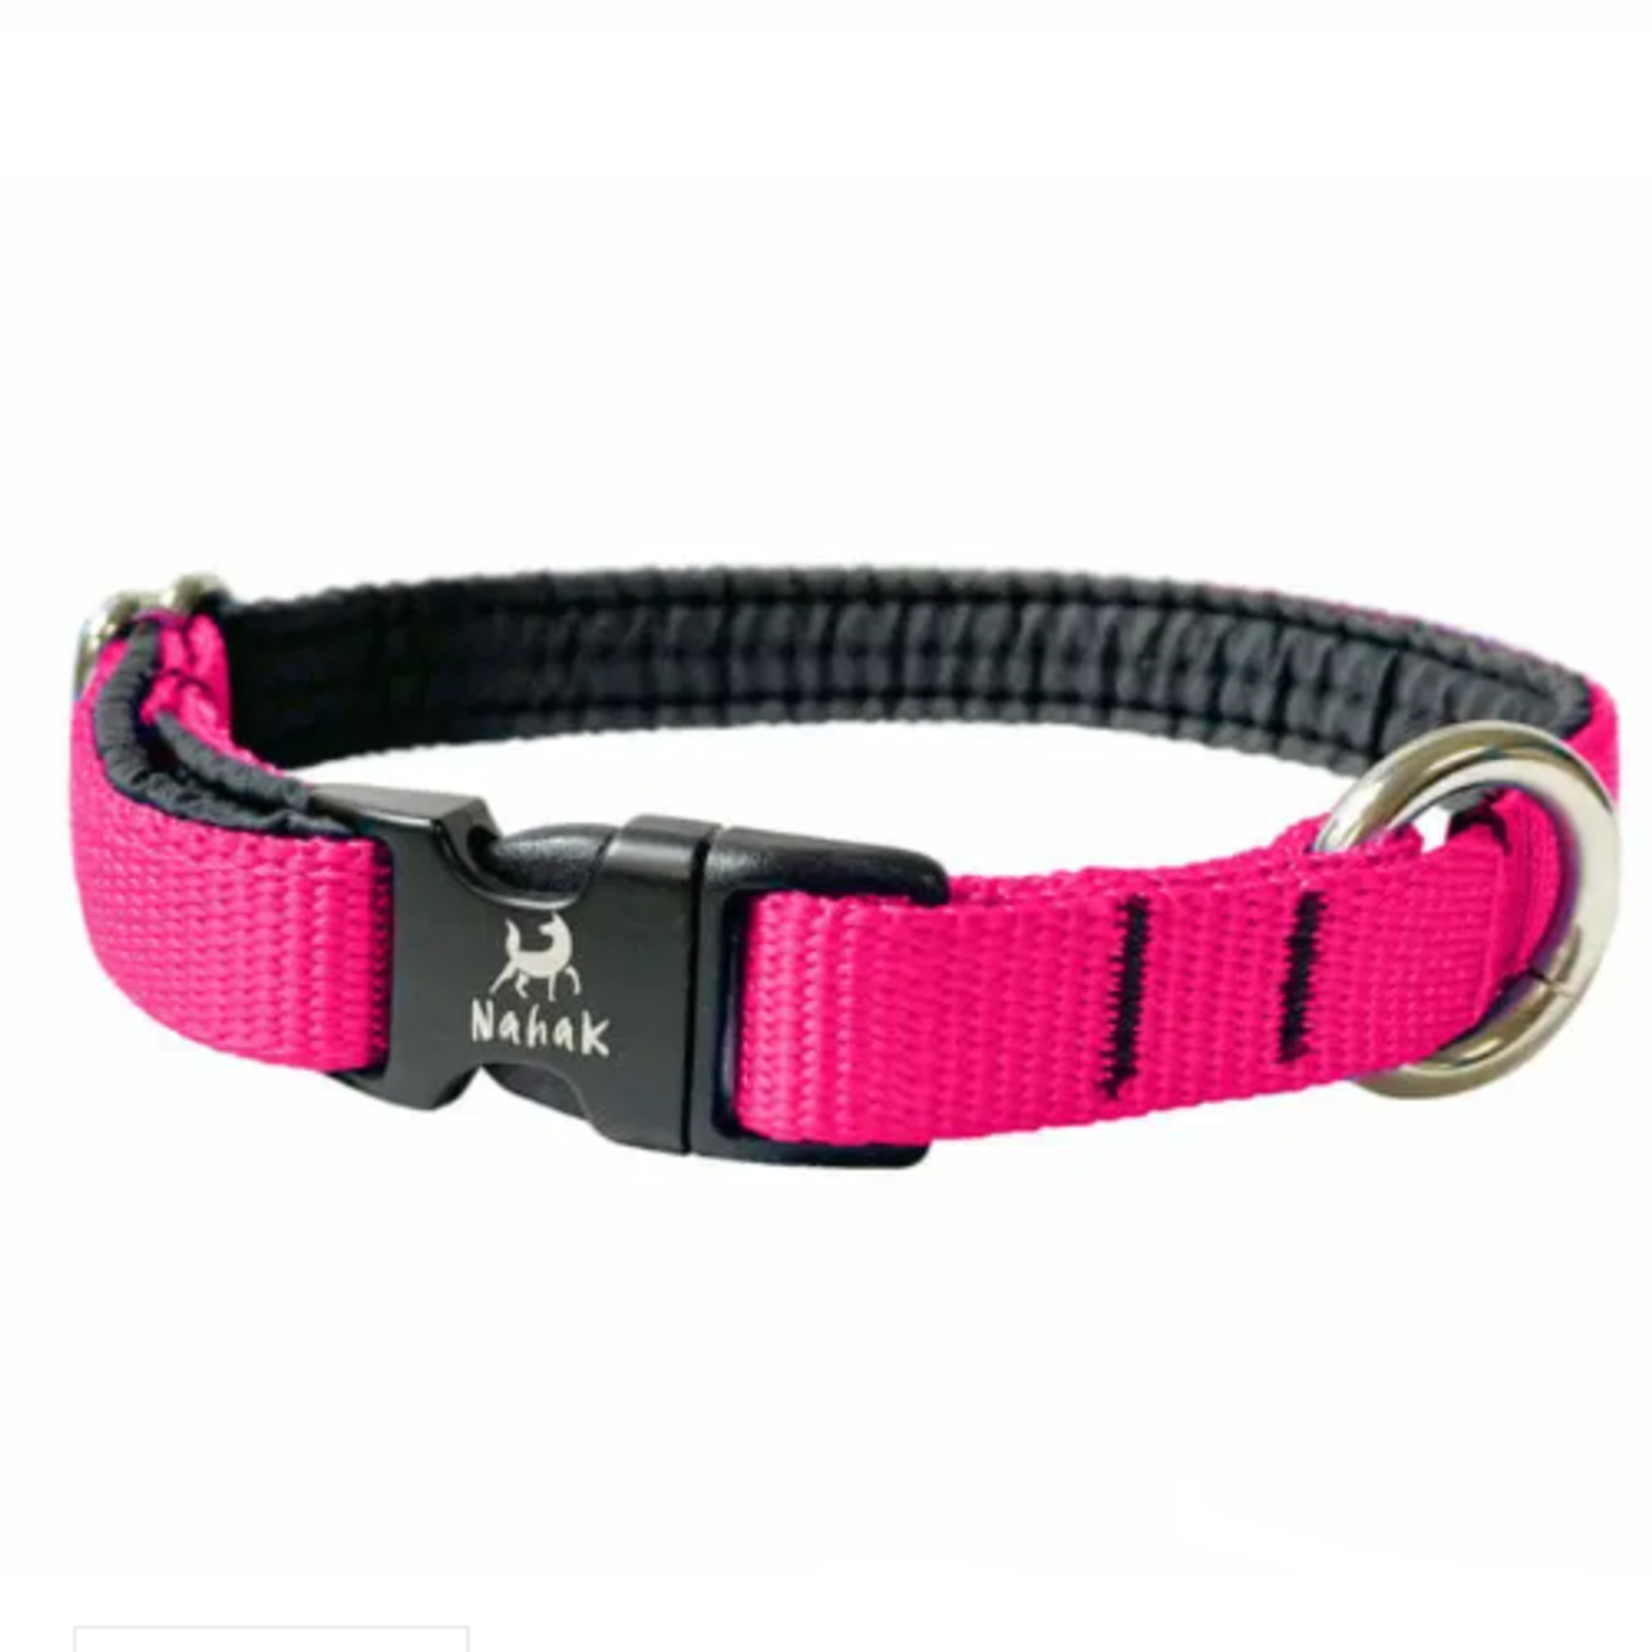 Nahak Collar Padded with Clip for small dog